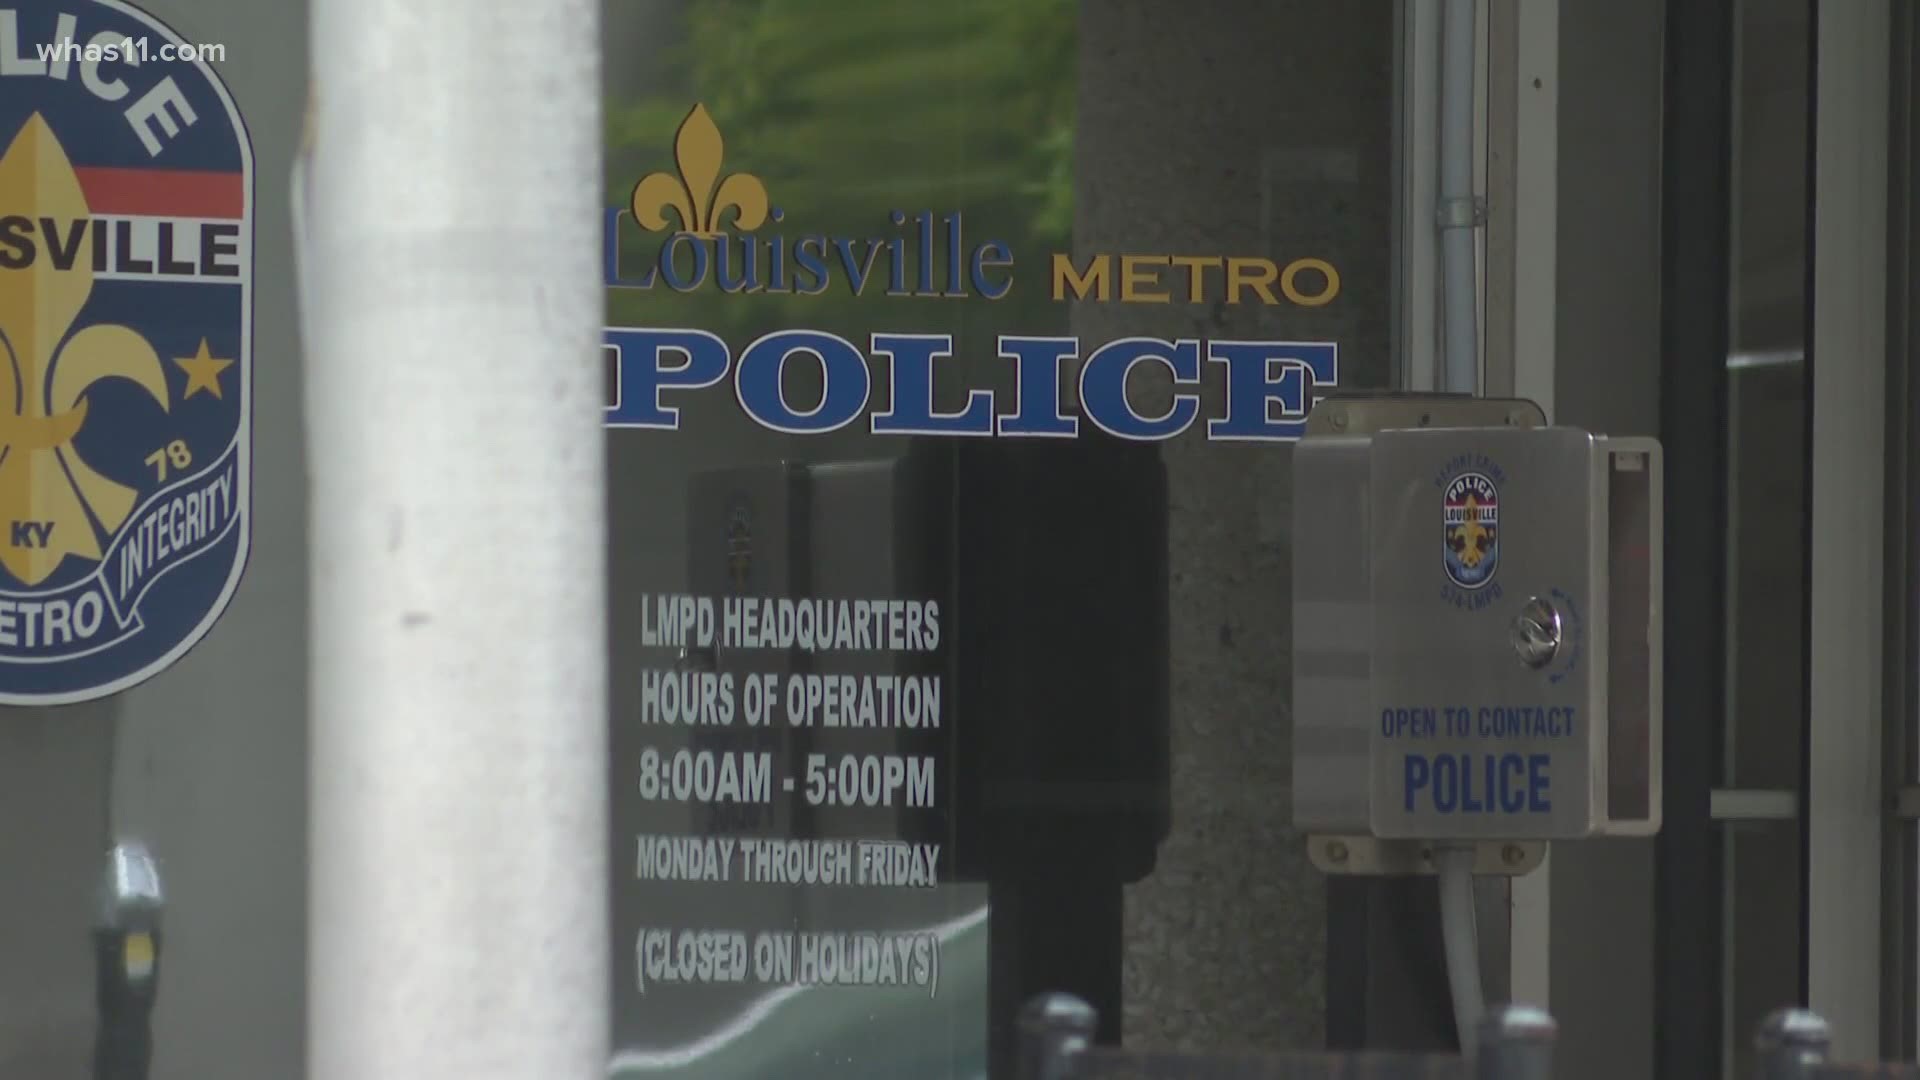 Community leaders in Louisville want to see the metro police department recruit more minority police officers.